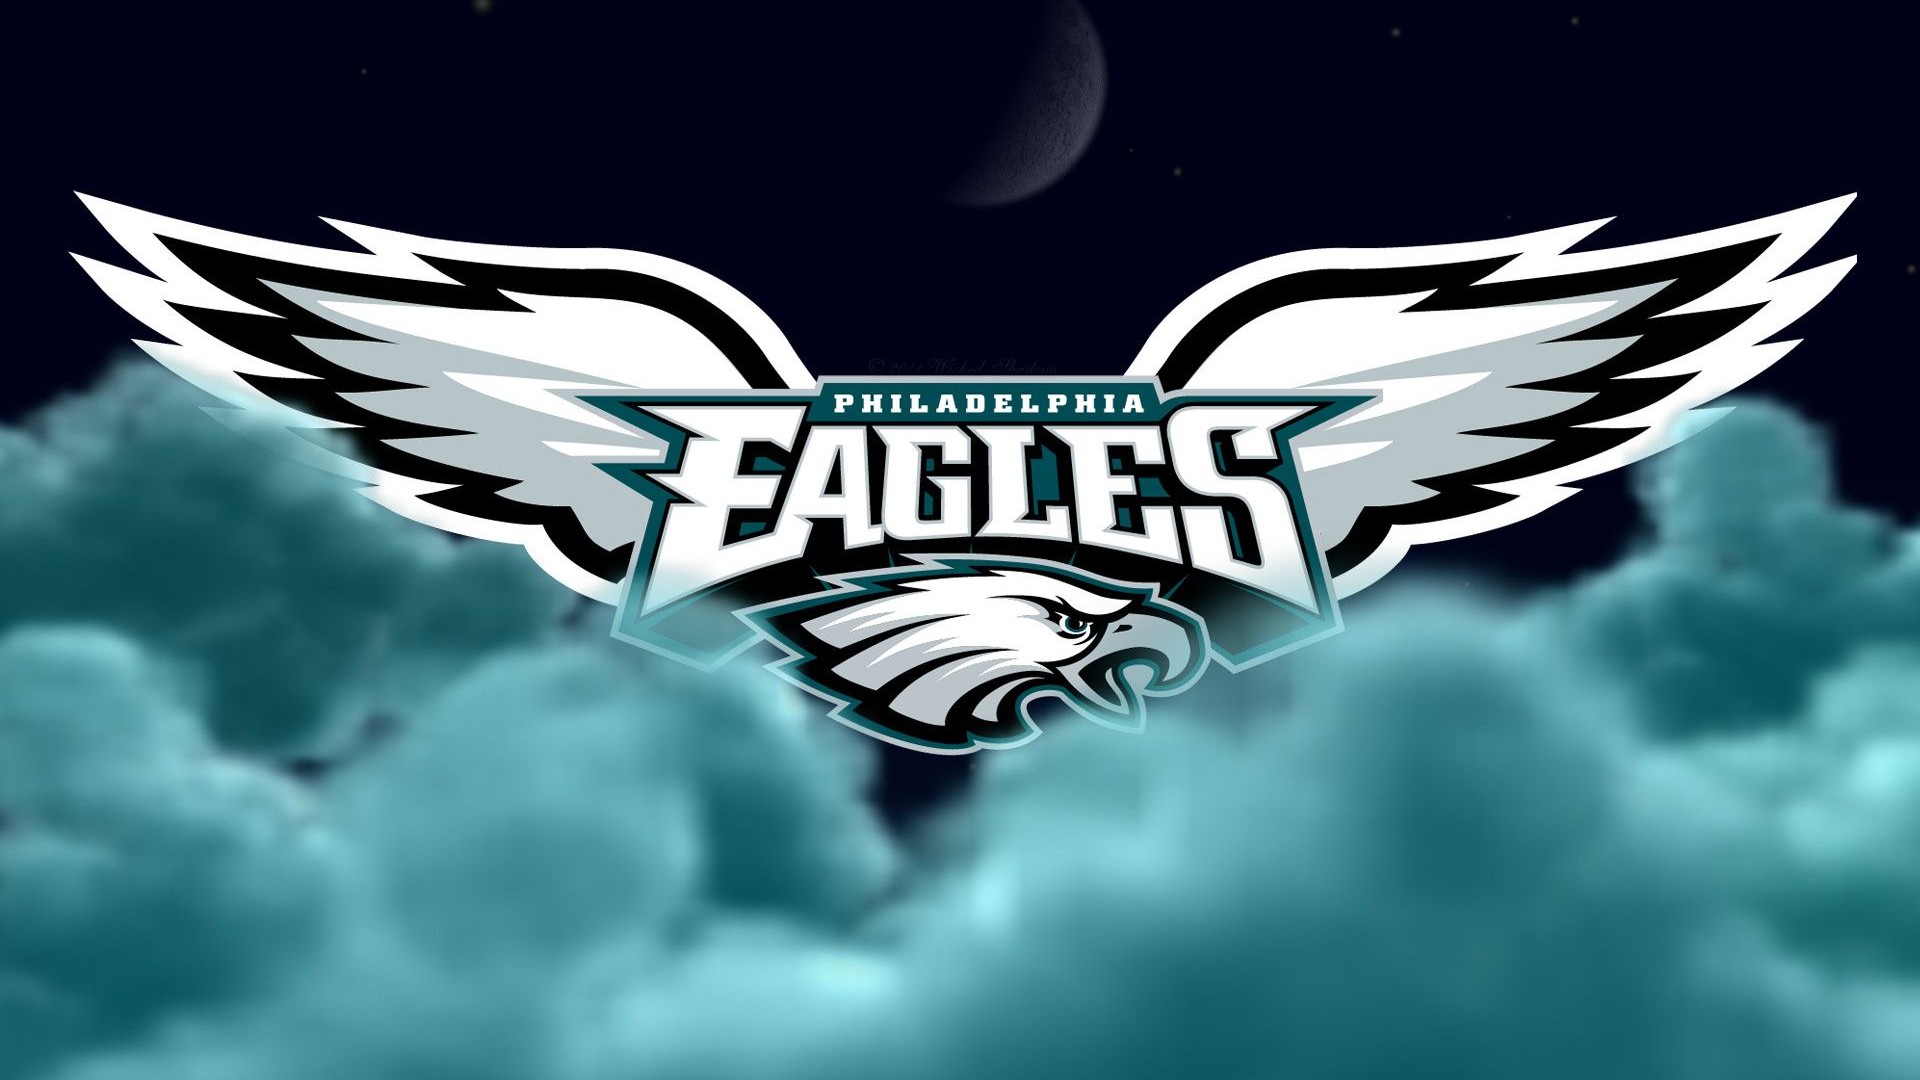 Wallpapers HD Eagles With Resolution 1920X1080 pixel. You can make this wallpaper for your Mac or Windows Desktop Background, iPhone, Android or Tablet and another Smartphone device for free